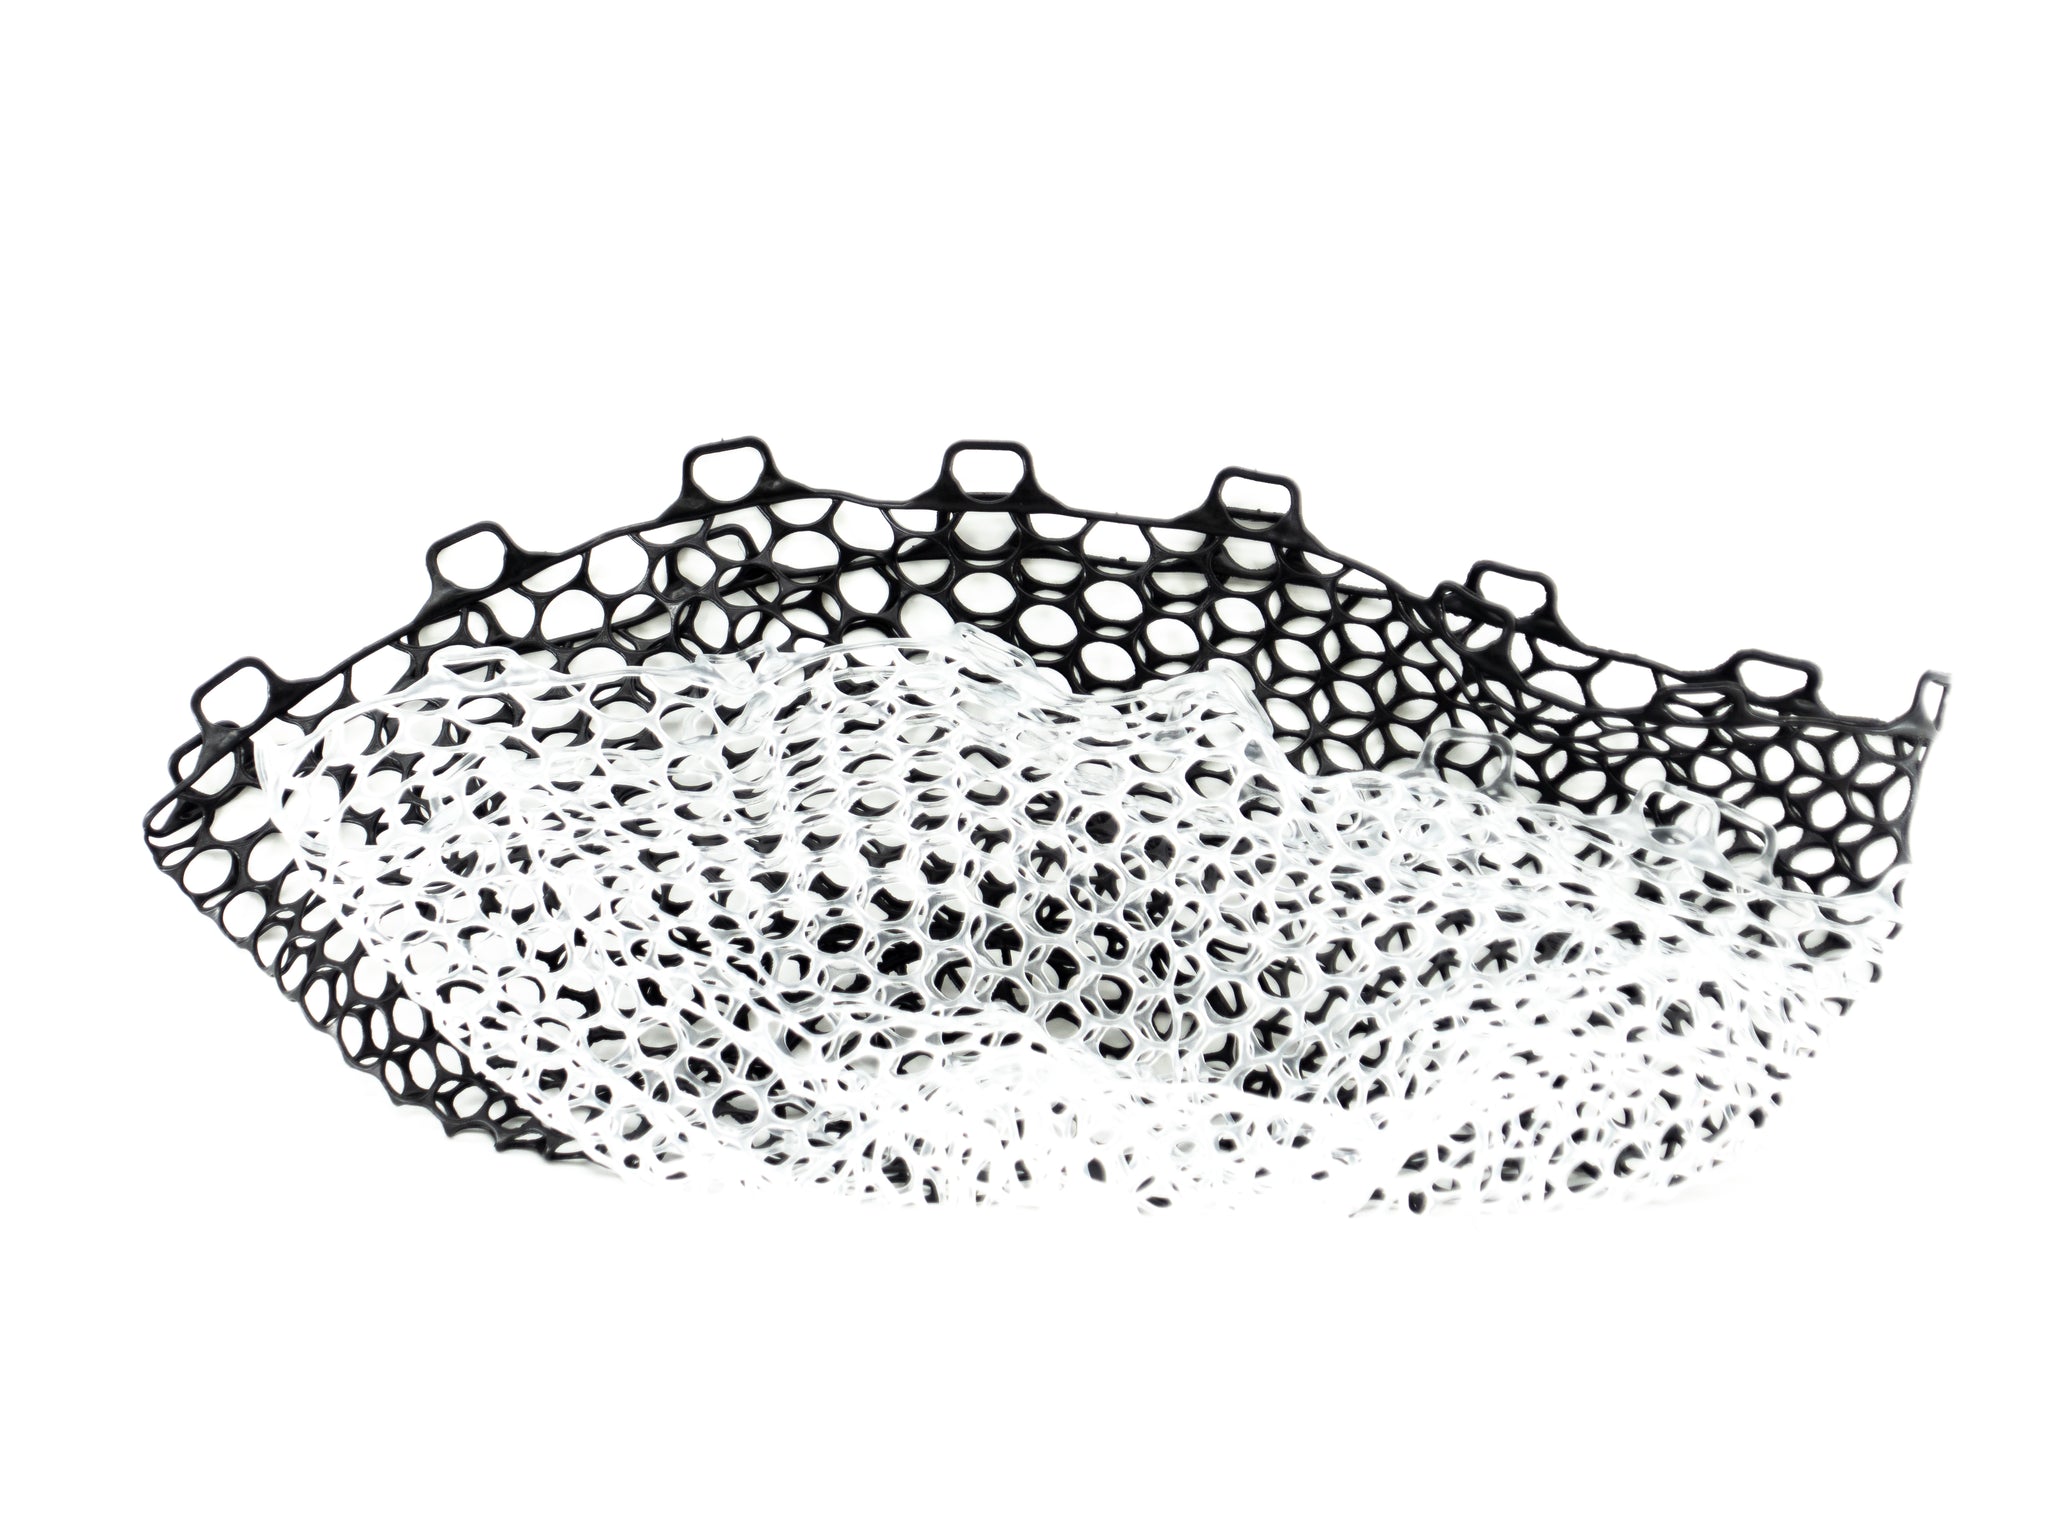 Ranger Replacement Net for 17 to 22 Hoop Sizes in Black